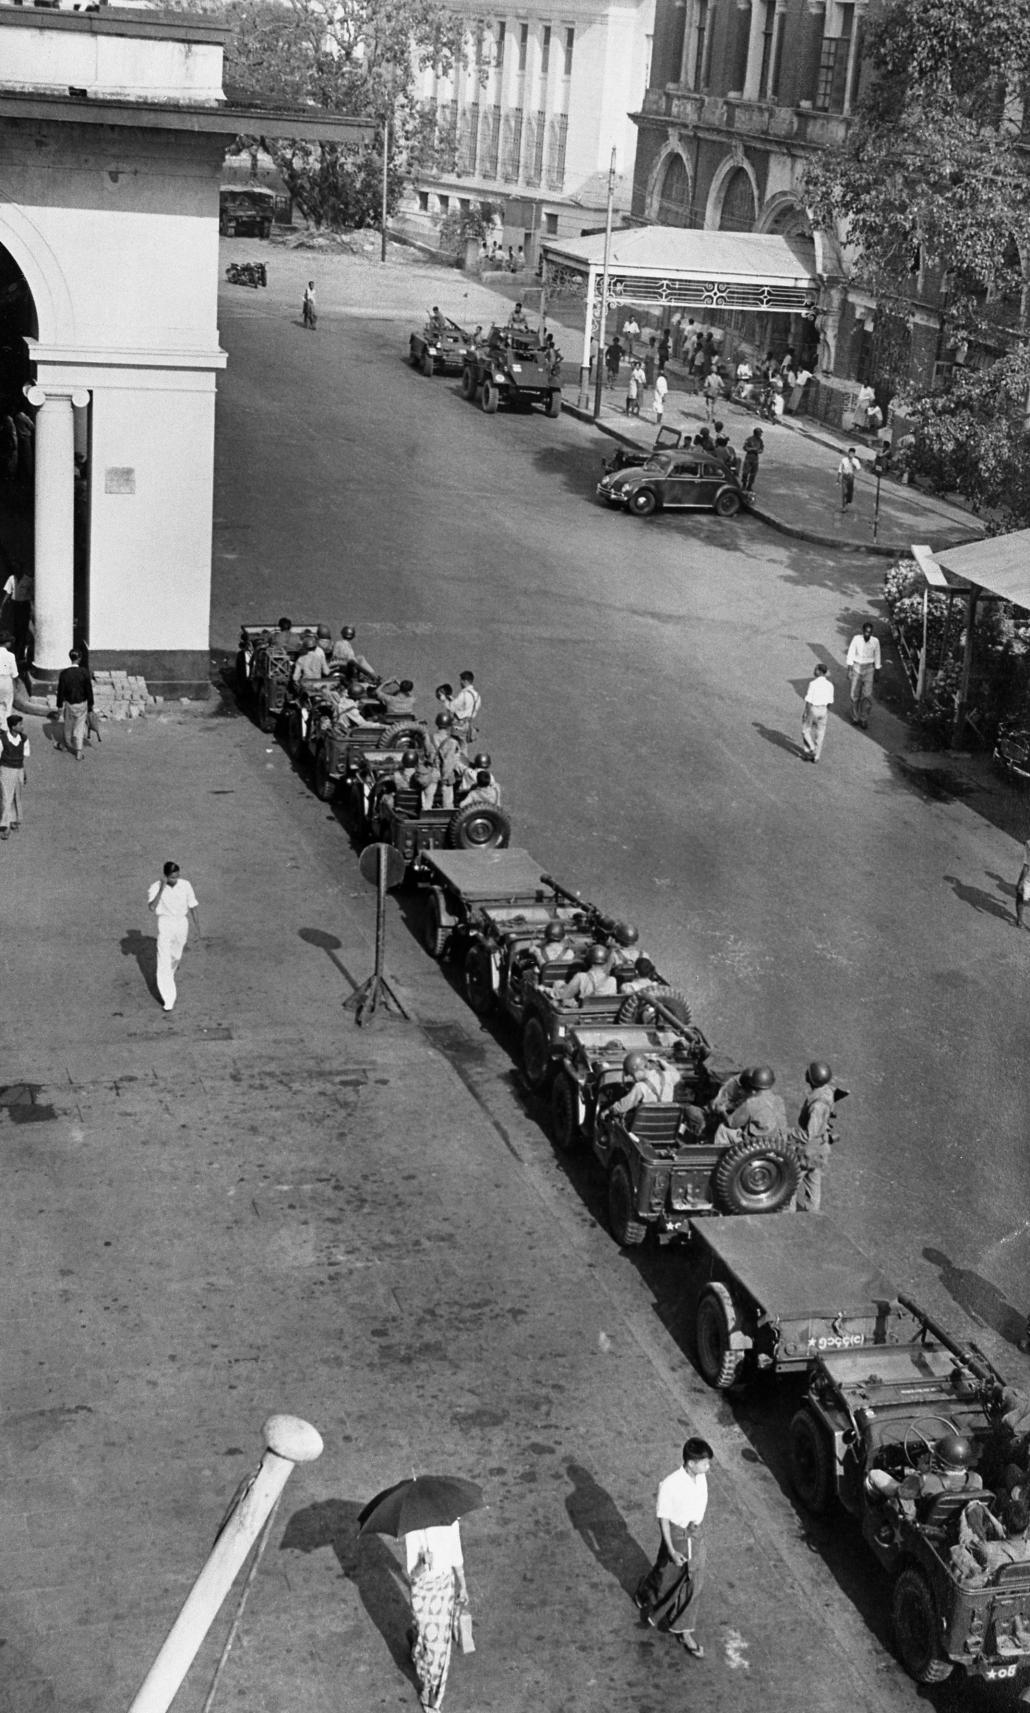 Military forces guard the streets of Yangon on March 4, 1962, the day General Ne Win took control of the country. (AFP)